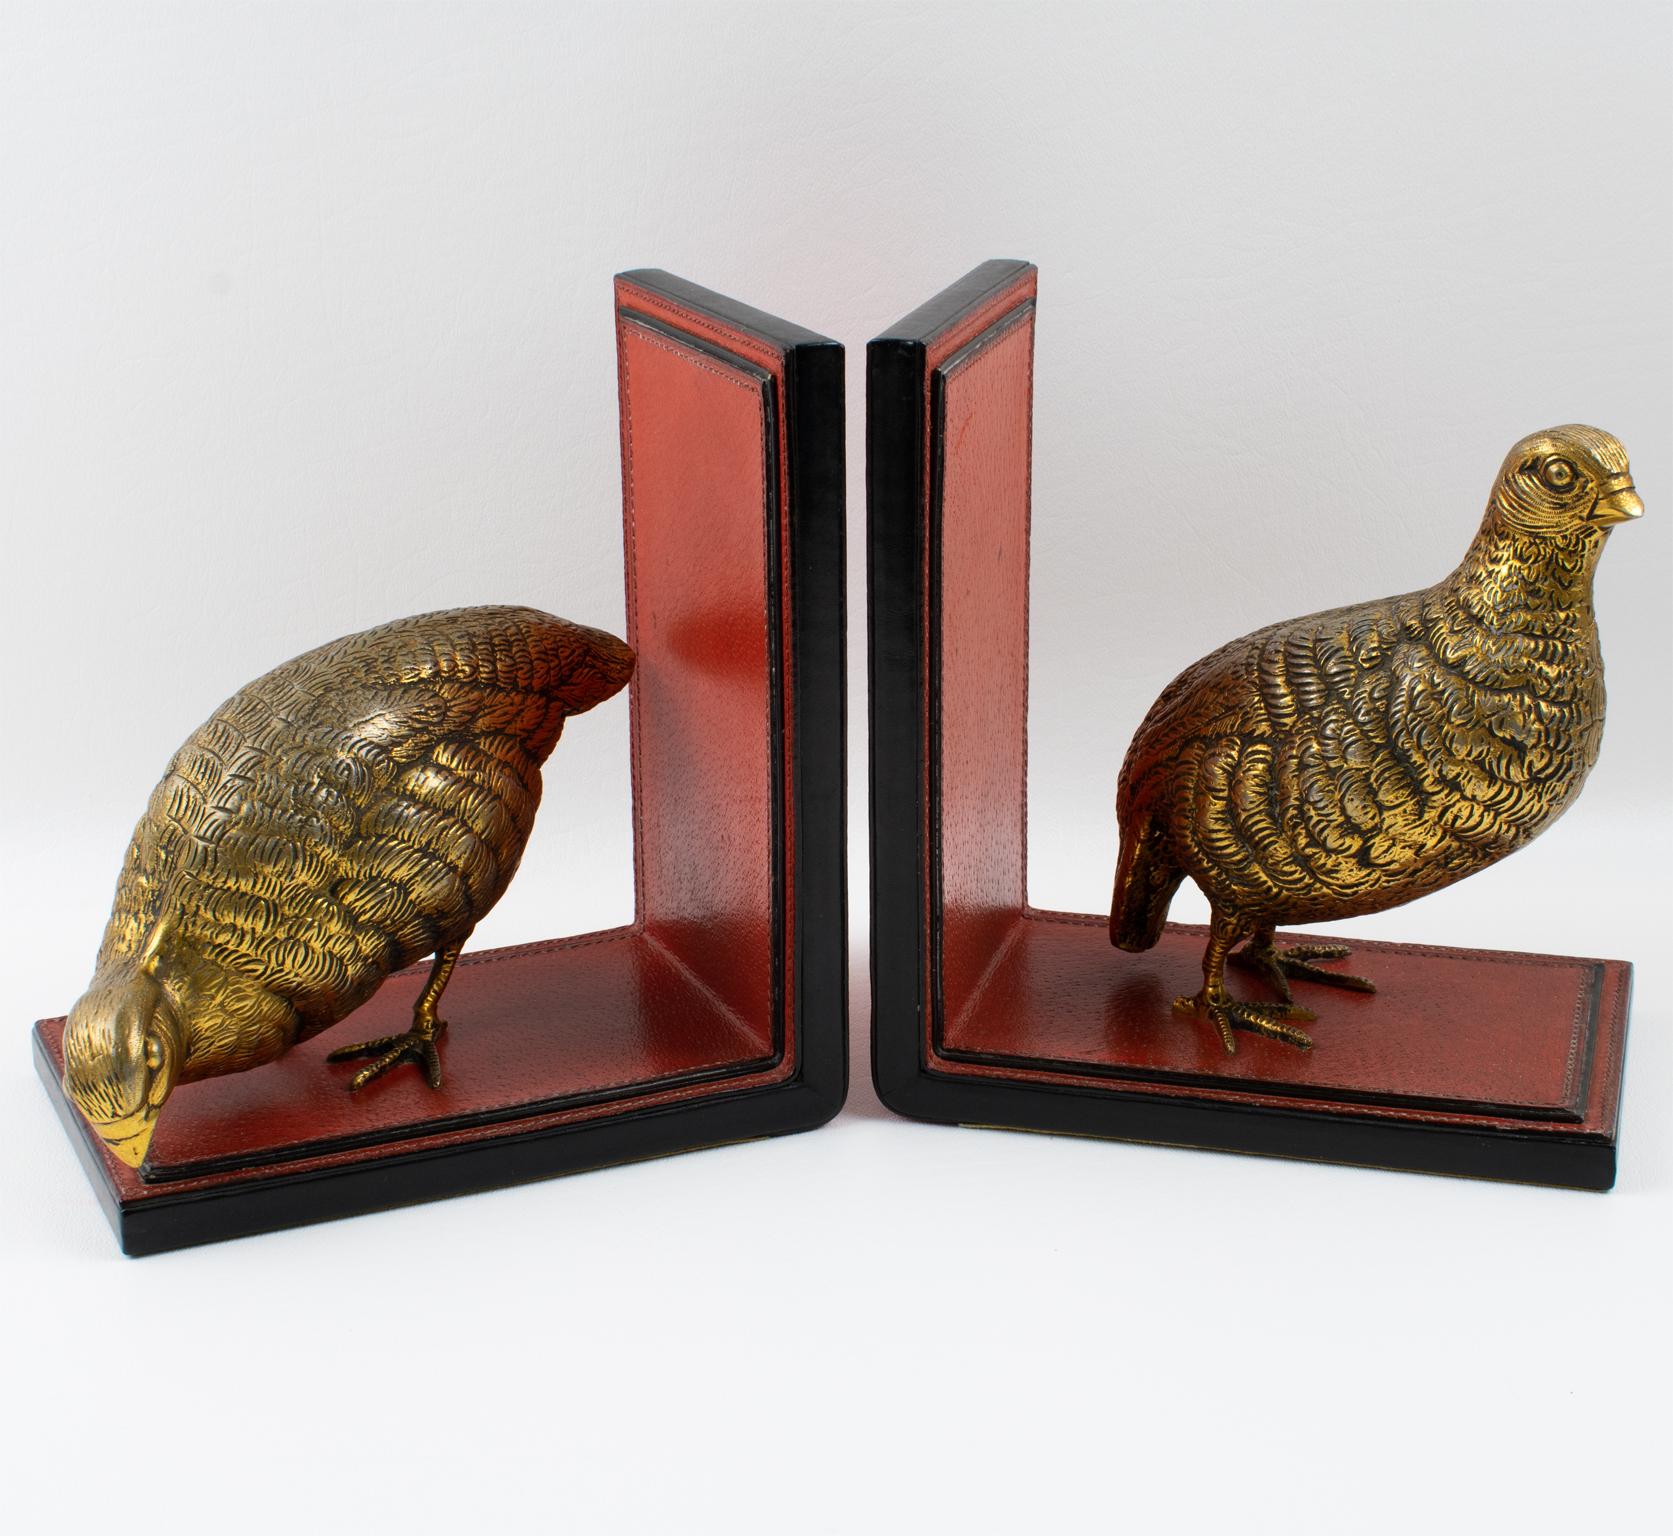 Gucci, Italy, designed this superb pair of handcrafted leather and metal bookends in the 1970s. This rare large-scale set features two gilded metal partridges resting on a hand-stitched leather 